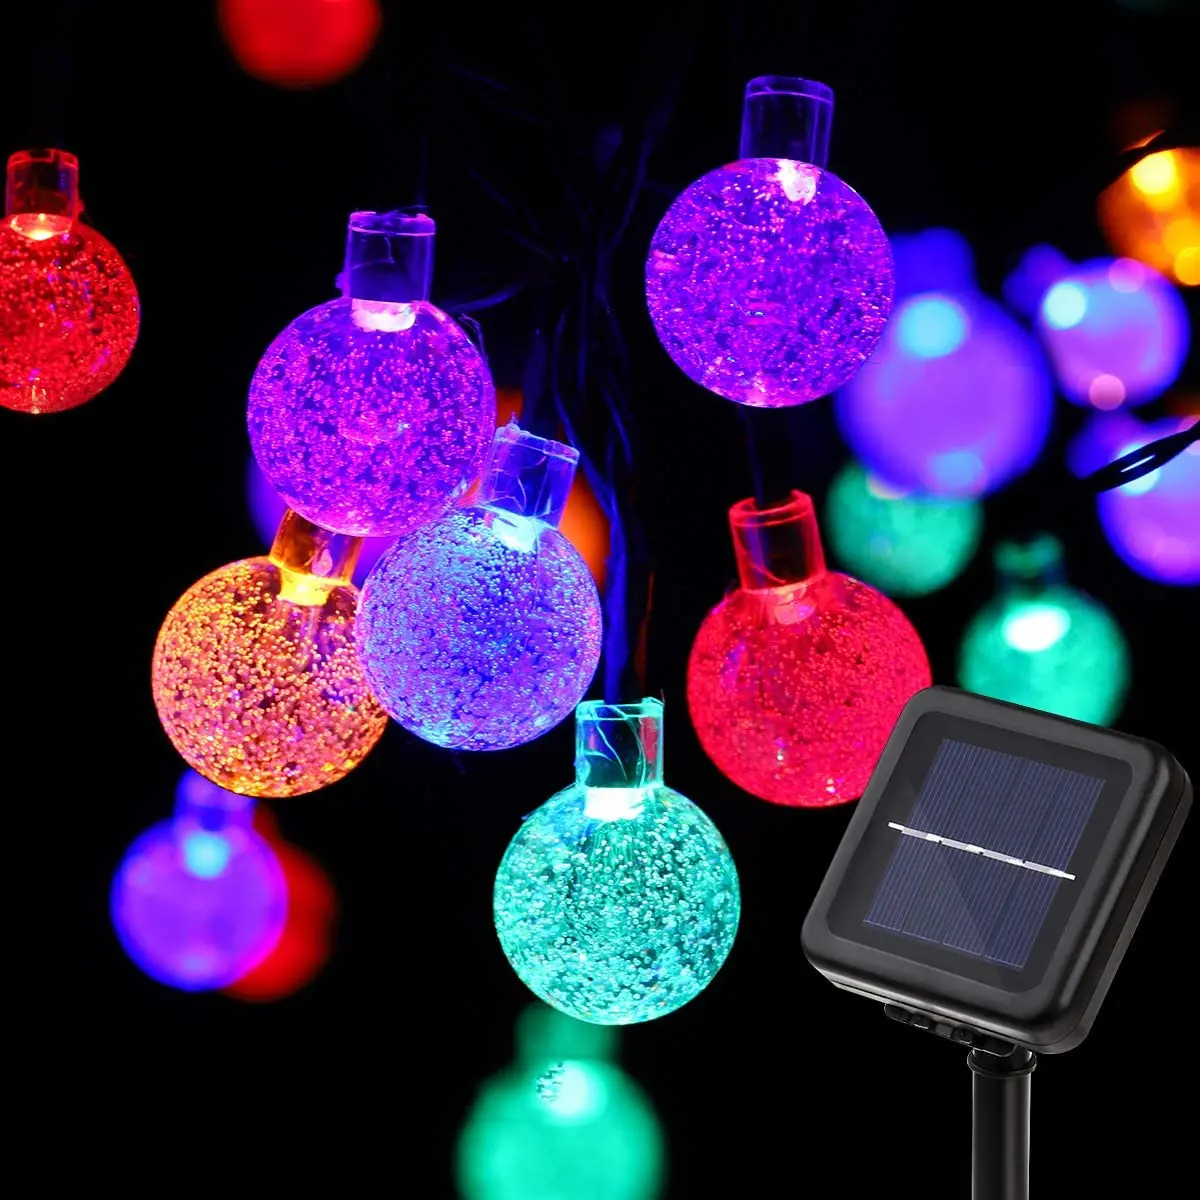 Outdoor Decorative Multicolor 7M 50LED 8 Modes Solar Panel Operated Bubble Cryst - $230.57